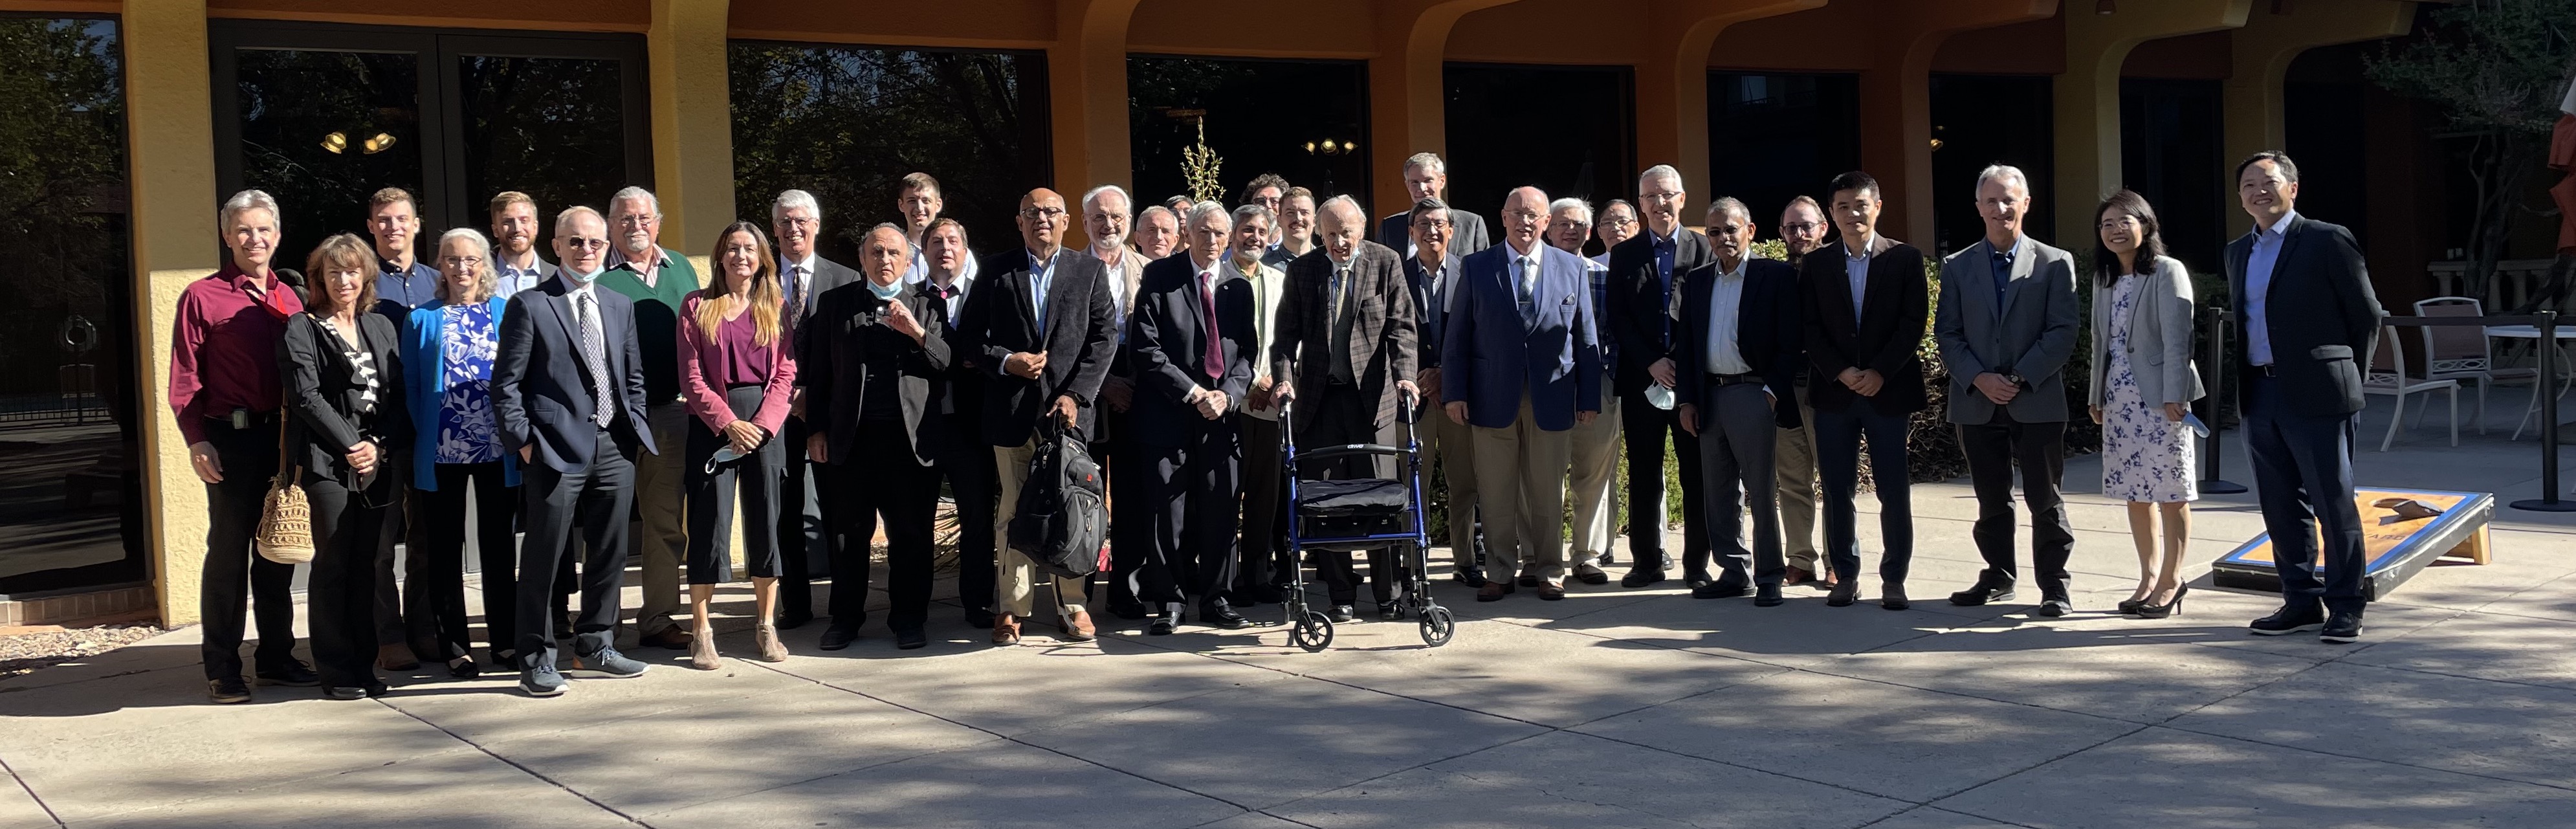 A group shot from Dr. Ivo Babuška's birthday celebrations at the Crowne Plaza in Albuquerque, NM. Credit: Oden Institute